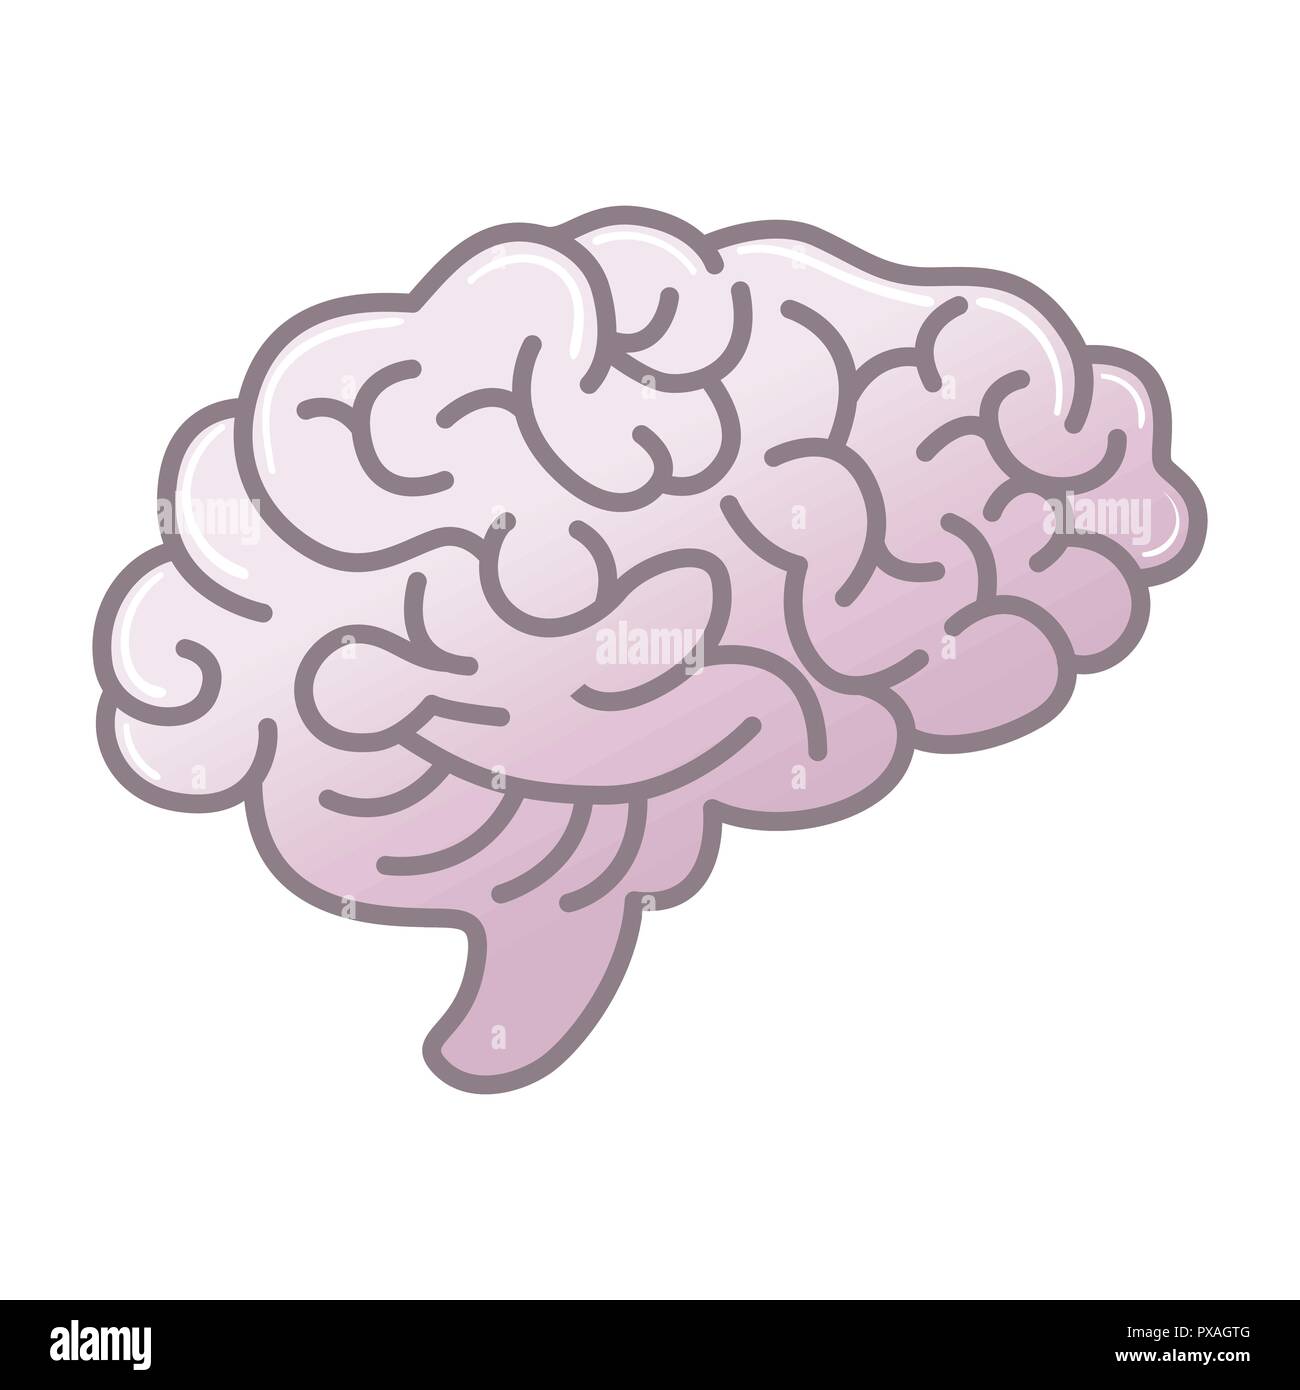 Human brain icon, symbol of intellect, study, learning and education. Stock Vector